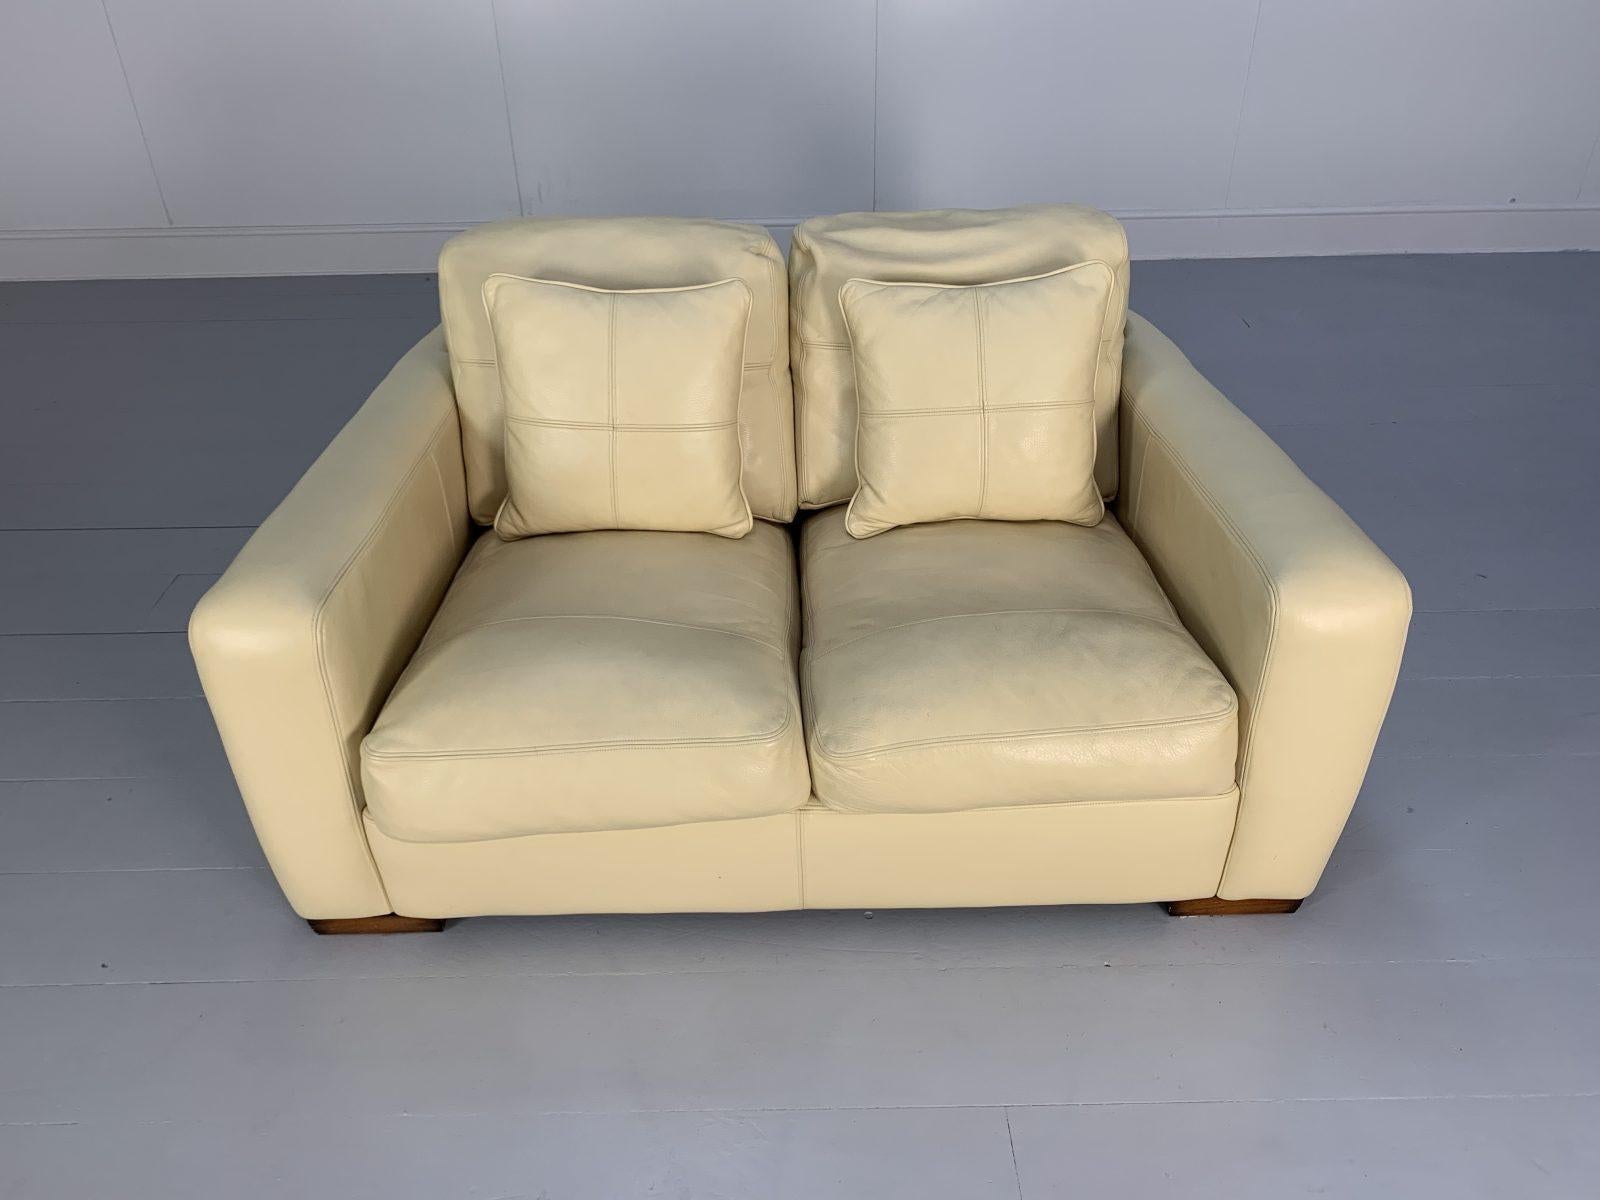 Contemporary Duresta “Panther” 2-Seat Sofa – in Cream Leather For Sale